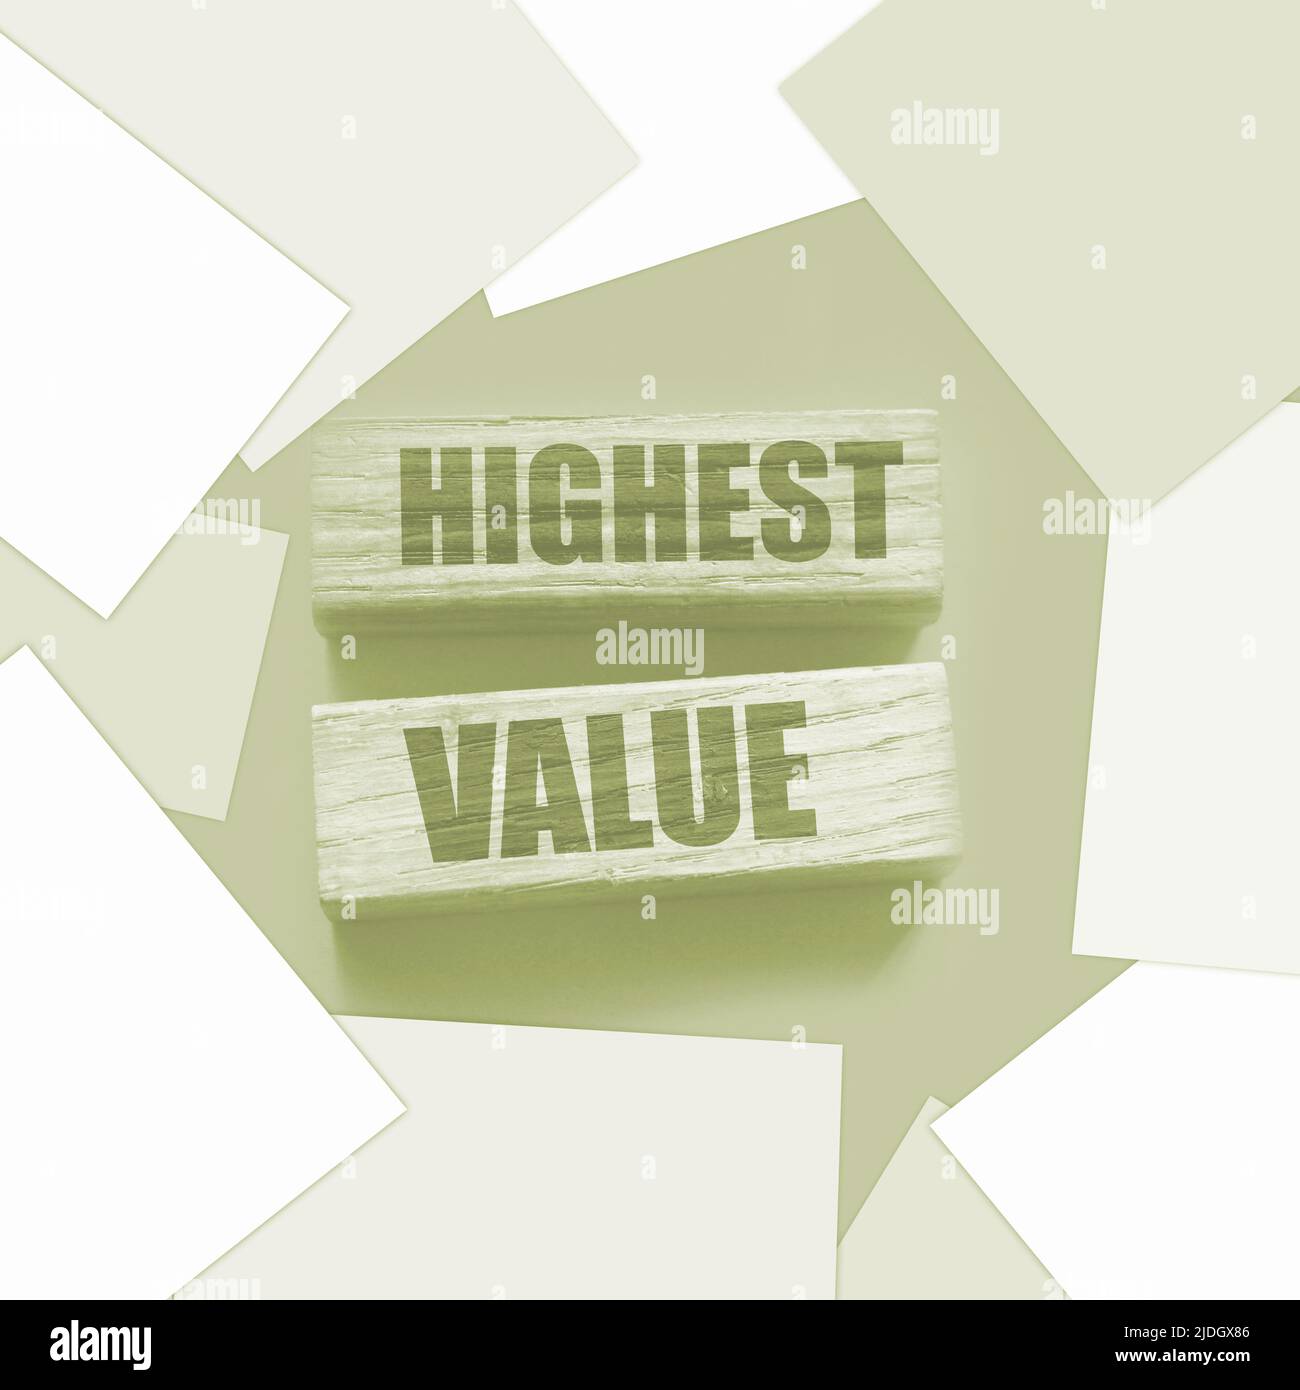 Highest values words on wooden building blocks isolated on yellow. Social, business and education concept. Stock Photo